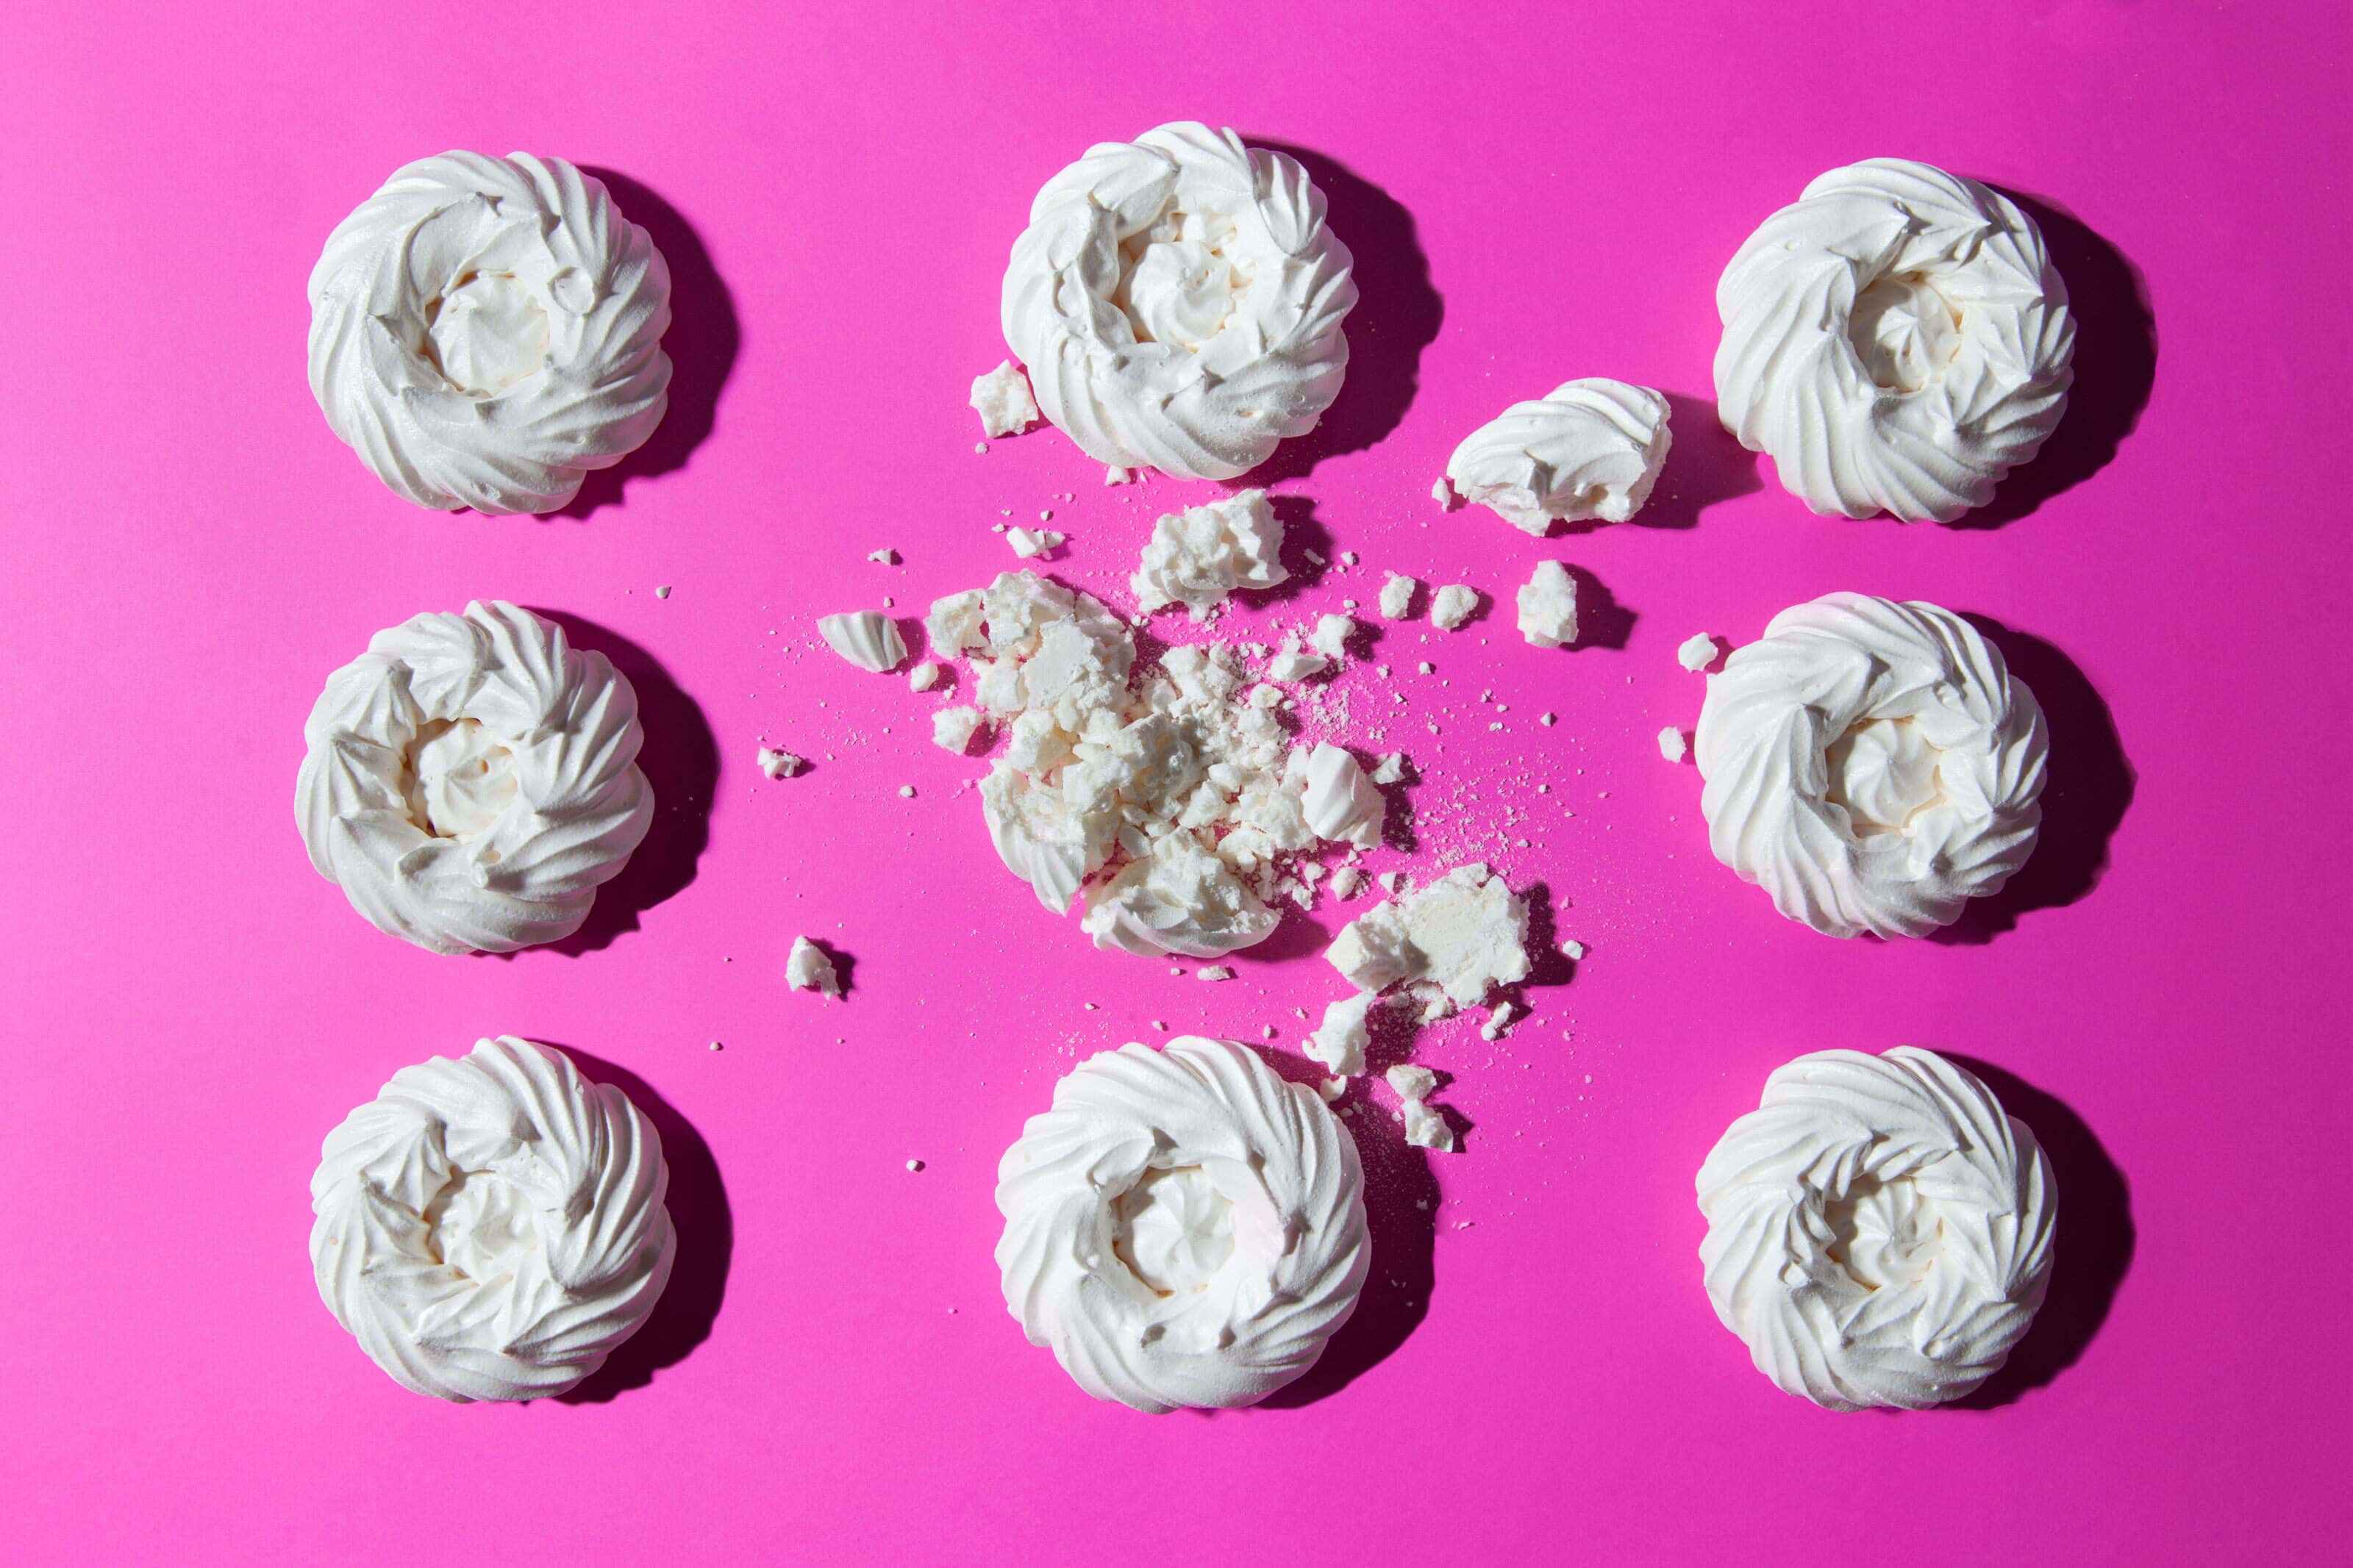 Meringue in a regular pattern on a pink background with one broken